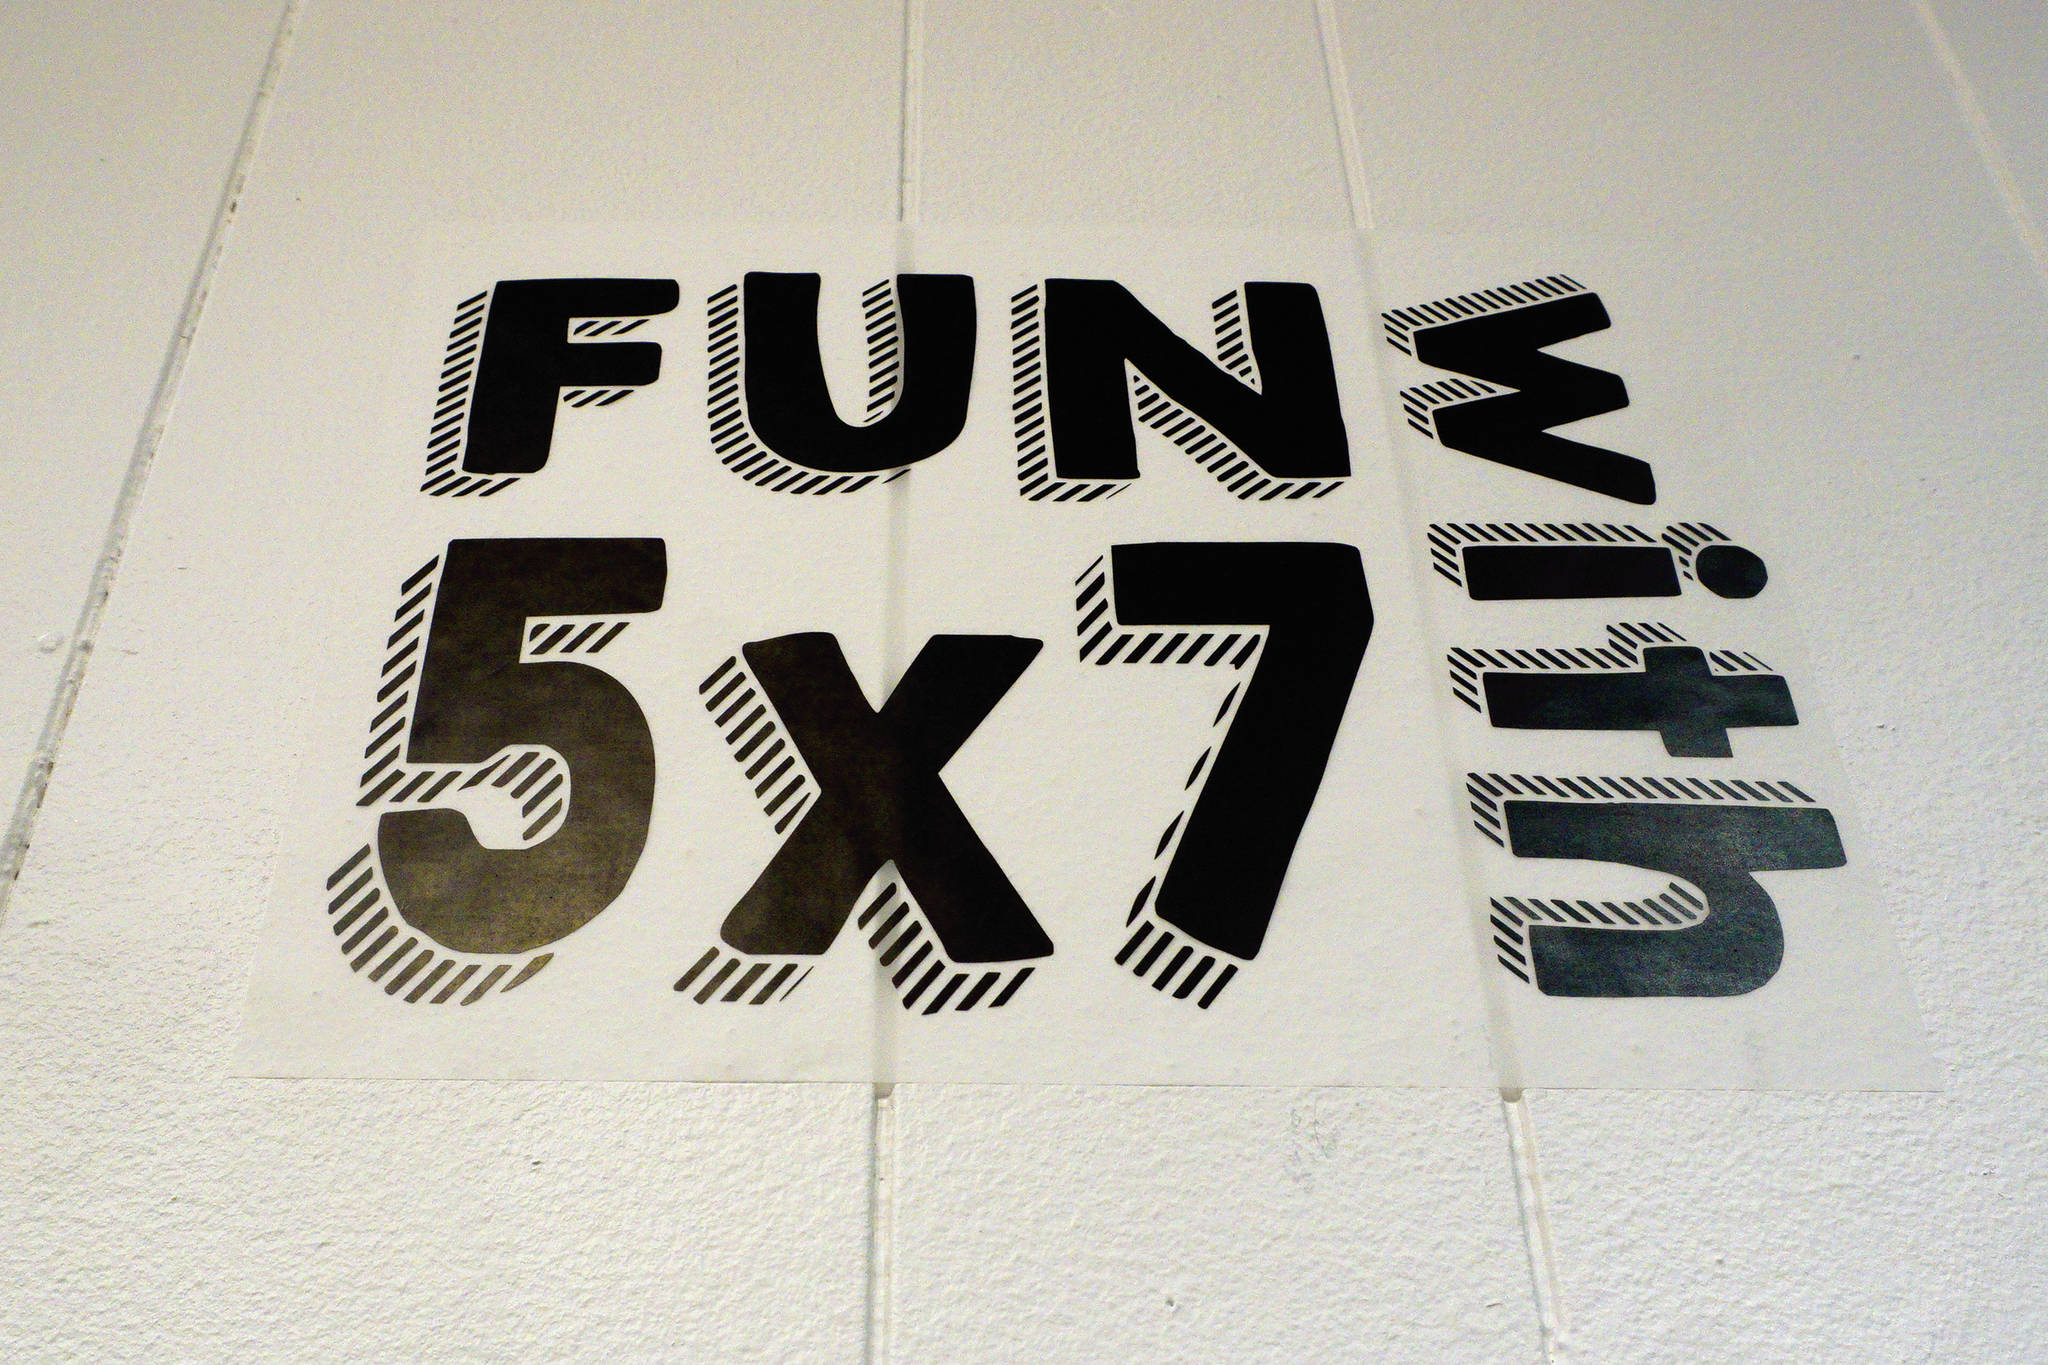 The sign for the "Fun with 5x7" show at the Homer Council on the Arts, on display through Dec. 17, 2020, at the gallery in Homer, Alaska. (Photo by Michael Armstrong/Homer News)